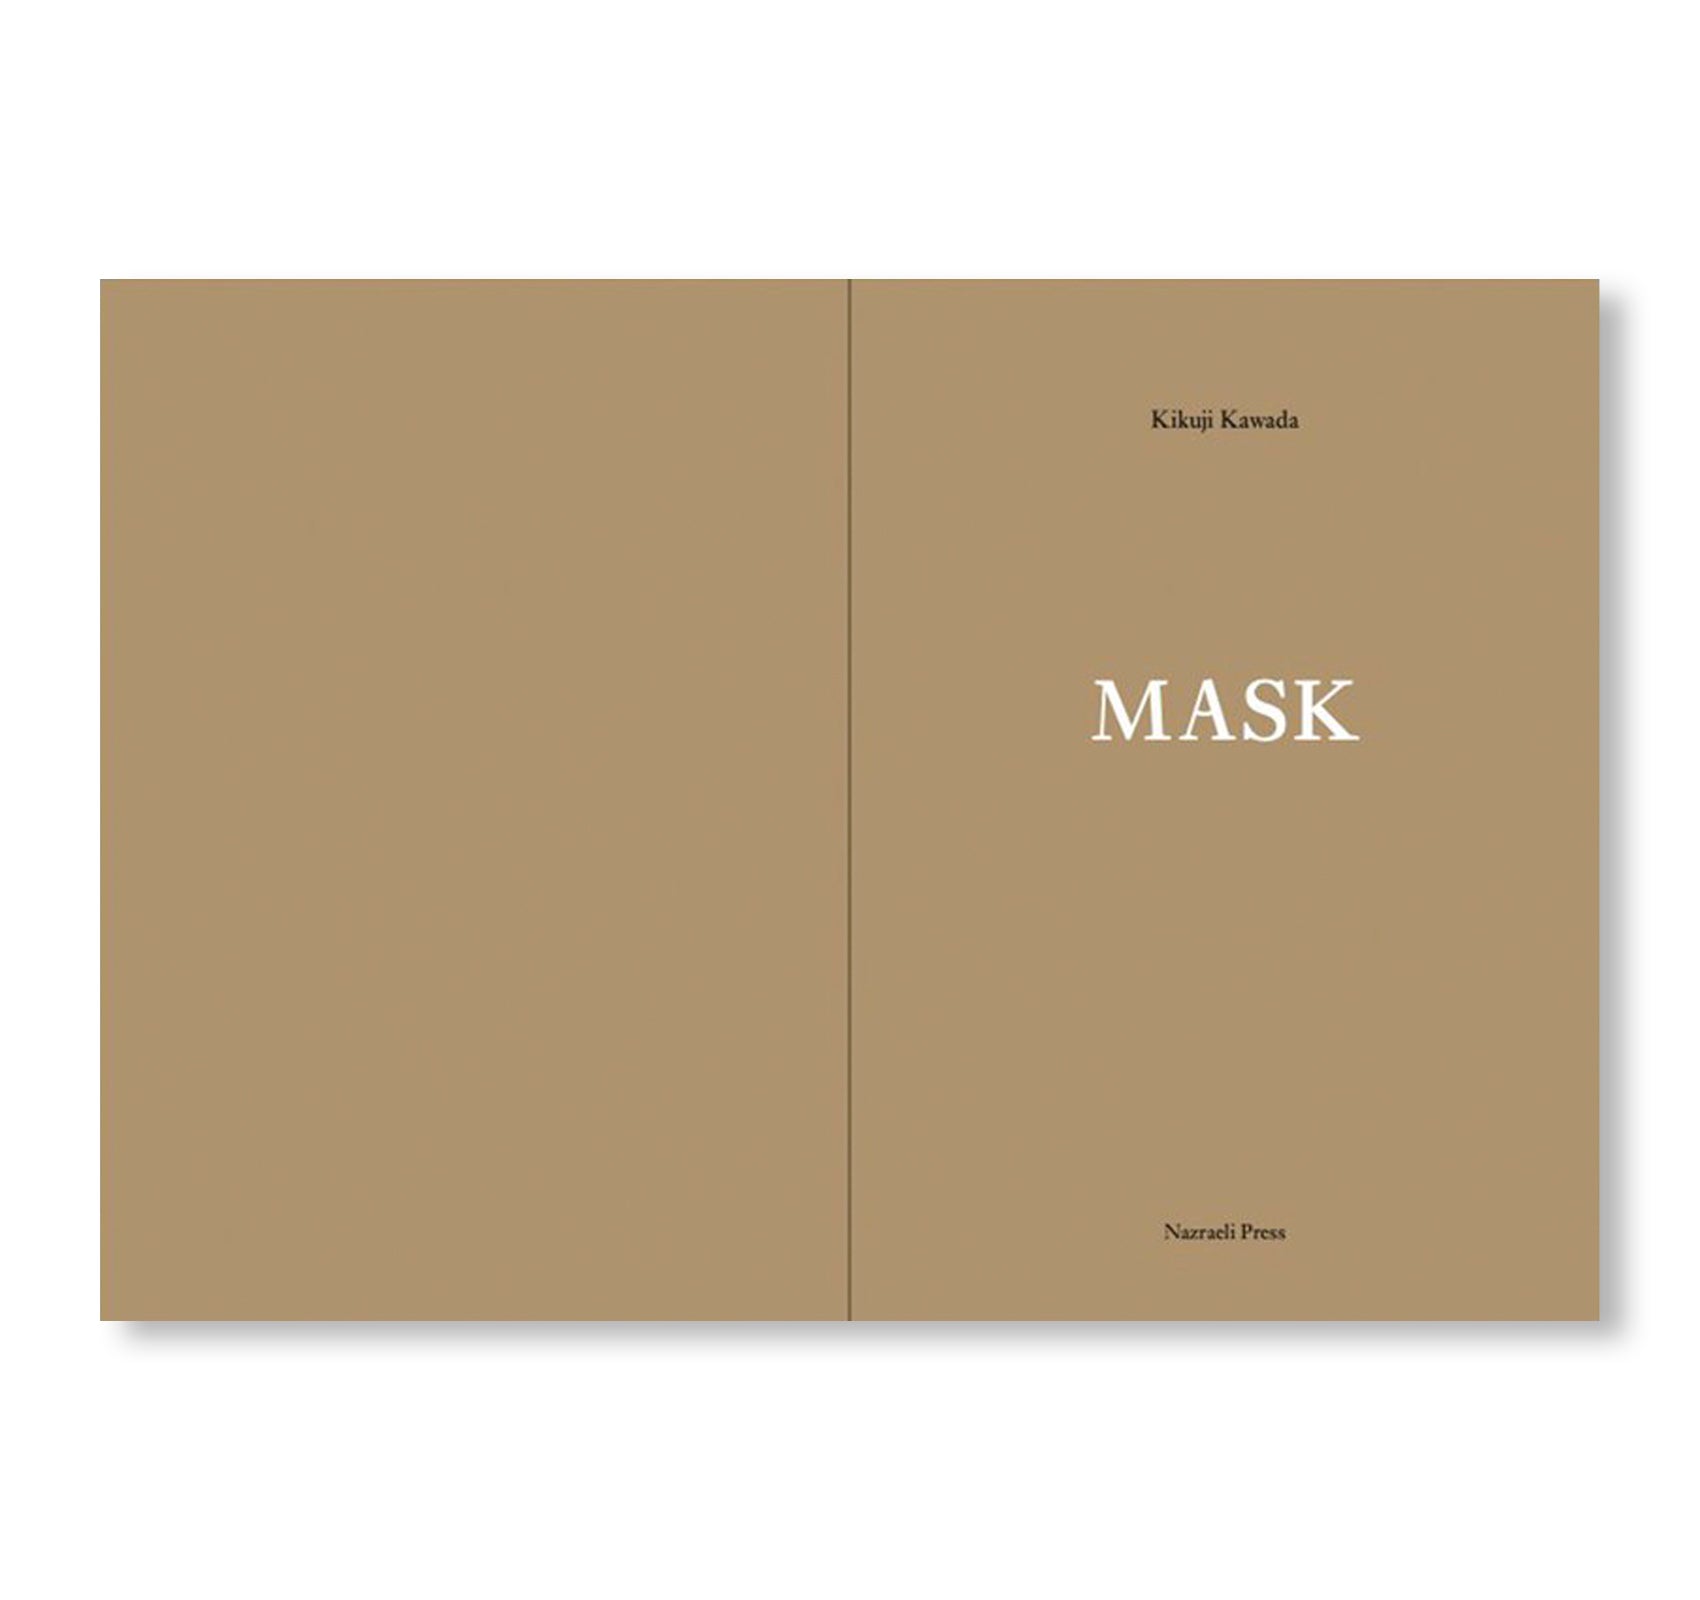 ONE PICTURE BOOK TWO #25: MASK by Kikuji Kawada [SPECIAL EDITION]